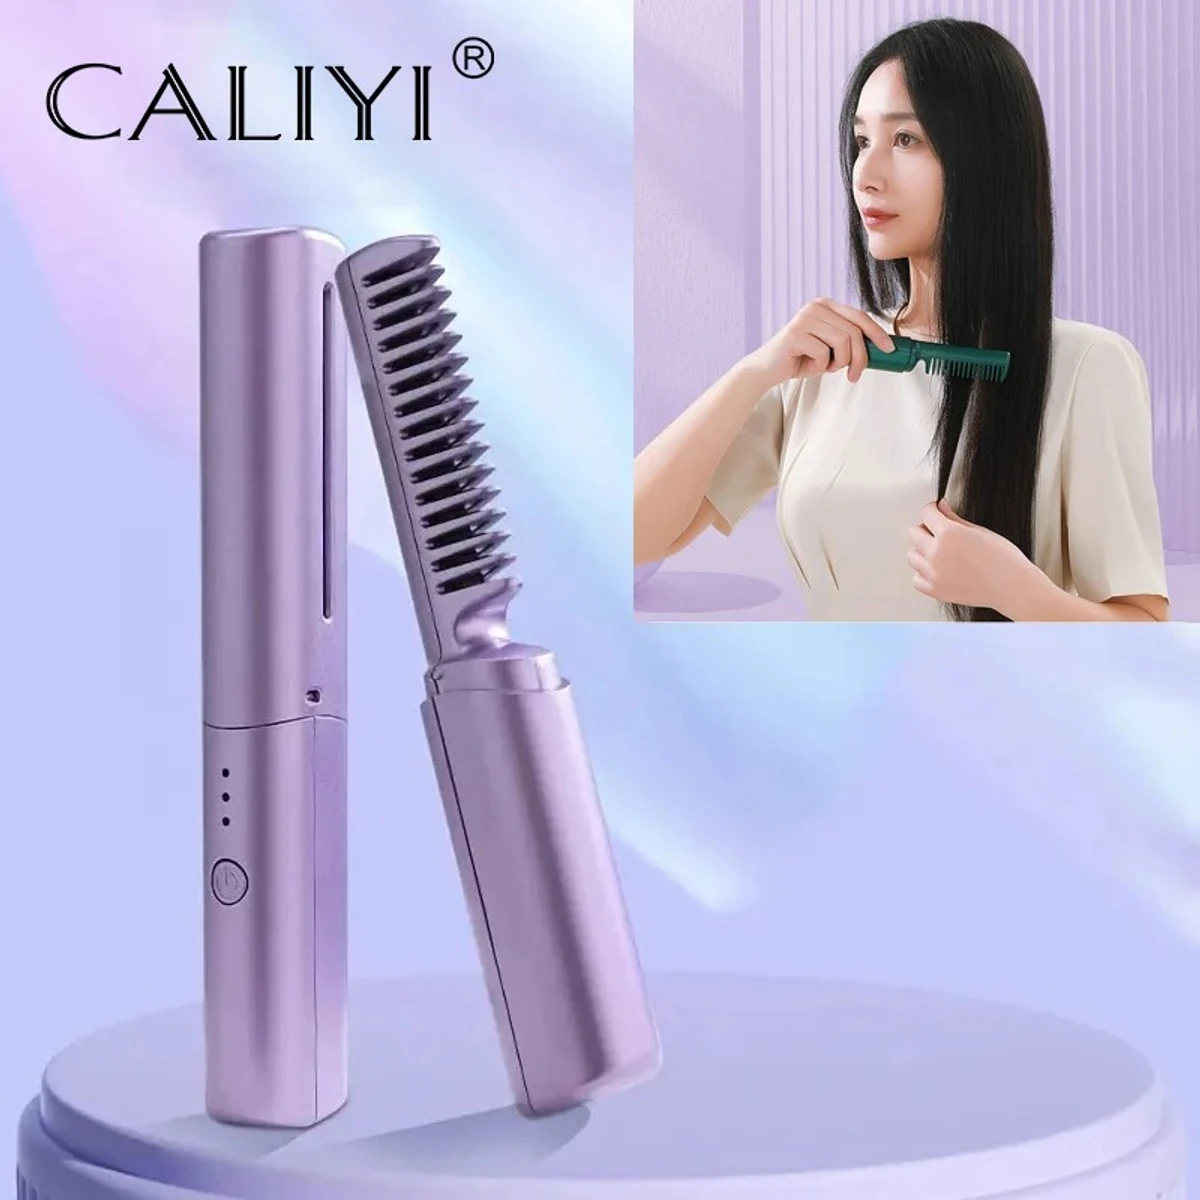 Rechargeable Mini Hair Straightener, Portable Travel Negative Ion Hair  Straightener Styling Comb, 2 in 1 Professional Lazy Portable USB Wireless Hair Straightener Comb for Travel and Home Use .